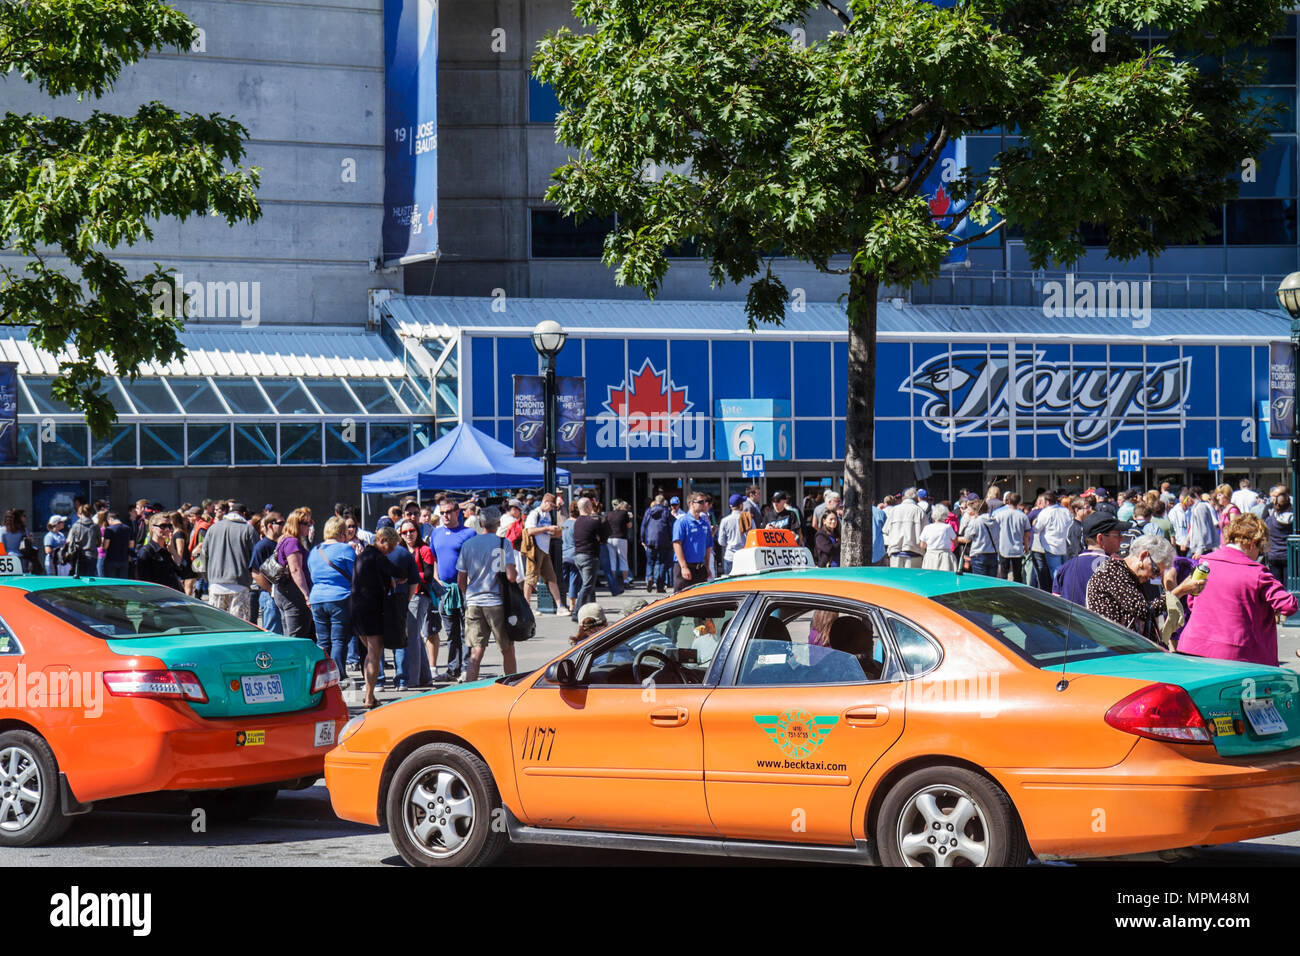 Toronto Canada,Bremner Boulevard,Rogers Centre,center,Blue Jays,Major League Baseball teamal sports,outside stadium,game day,arriving fans,taxi,taxis, Stock Photo